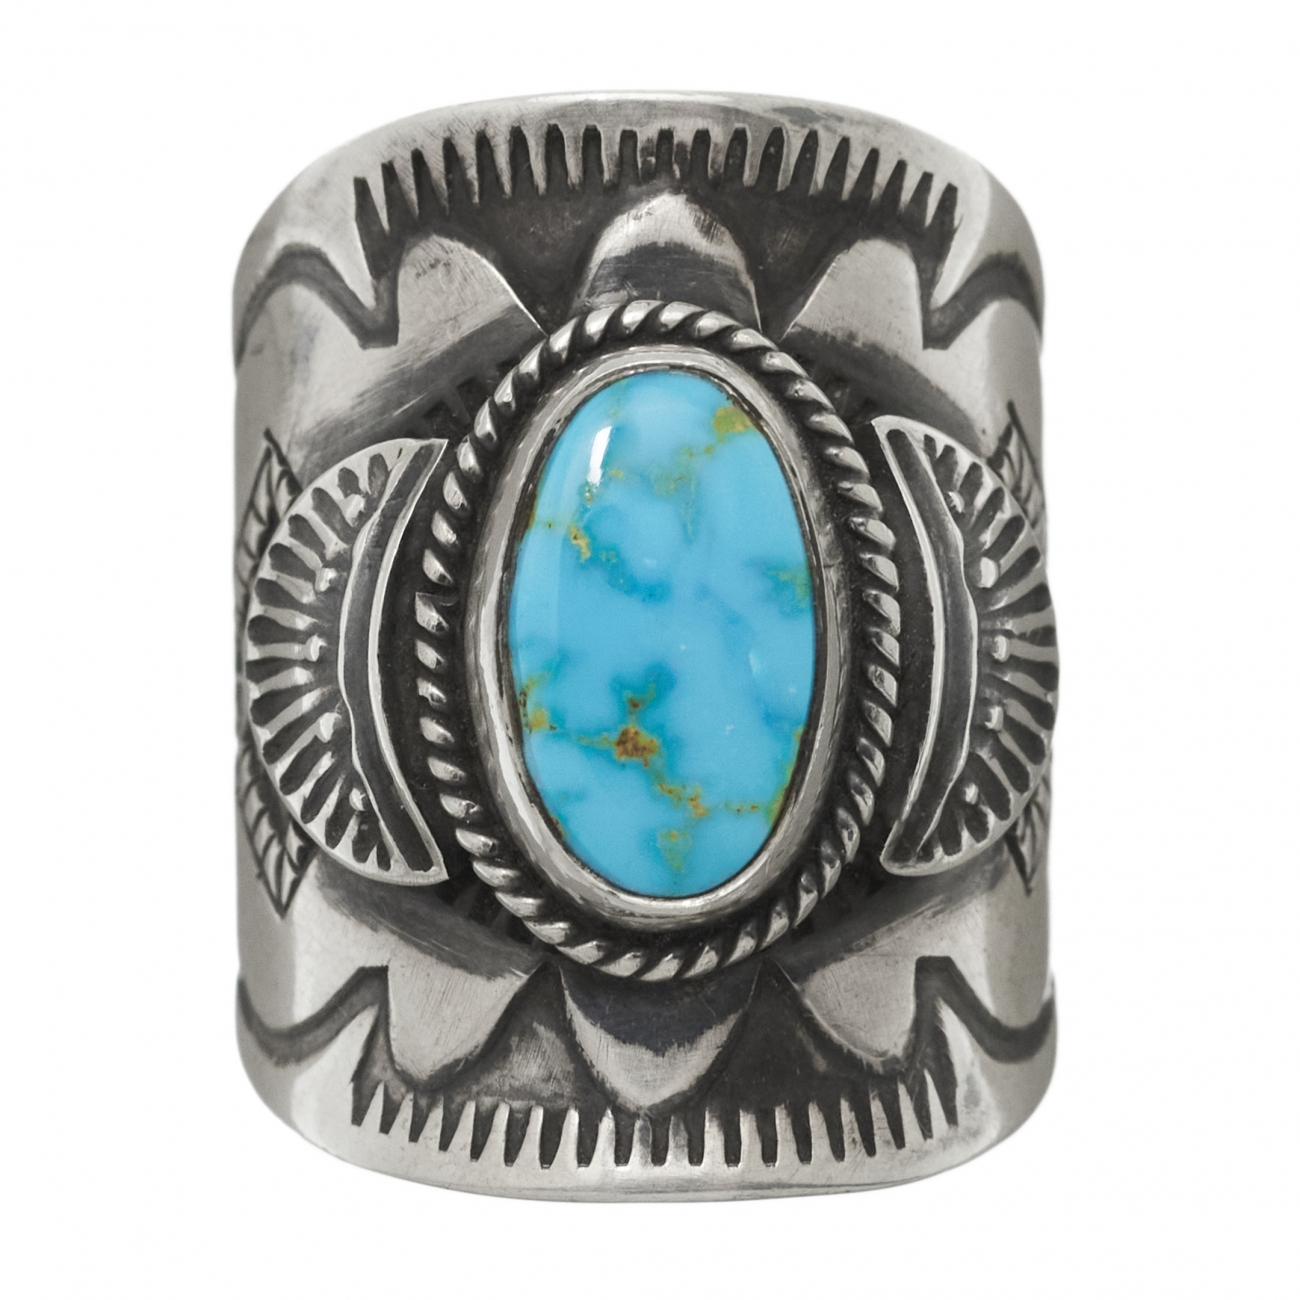 Navajo ring for women BA1118 in turquoise and silver - Harpo Paris